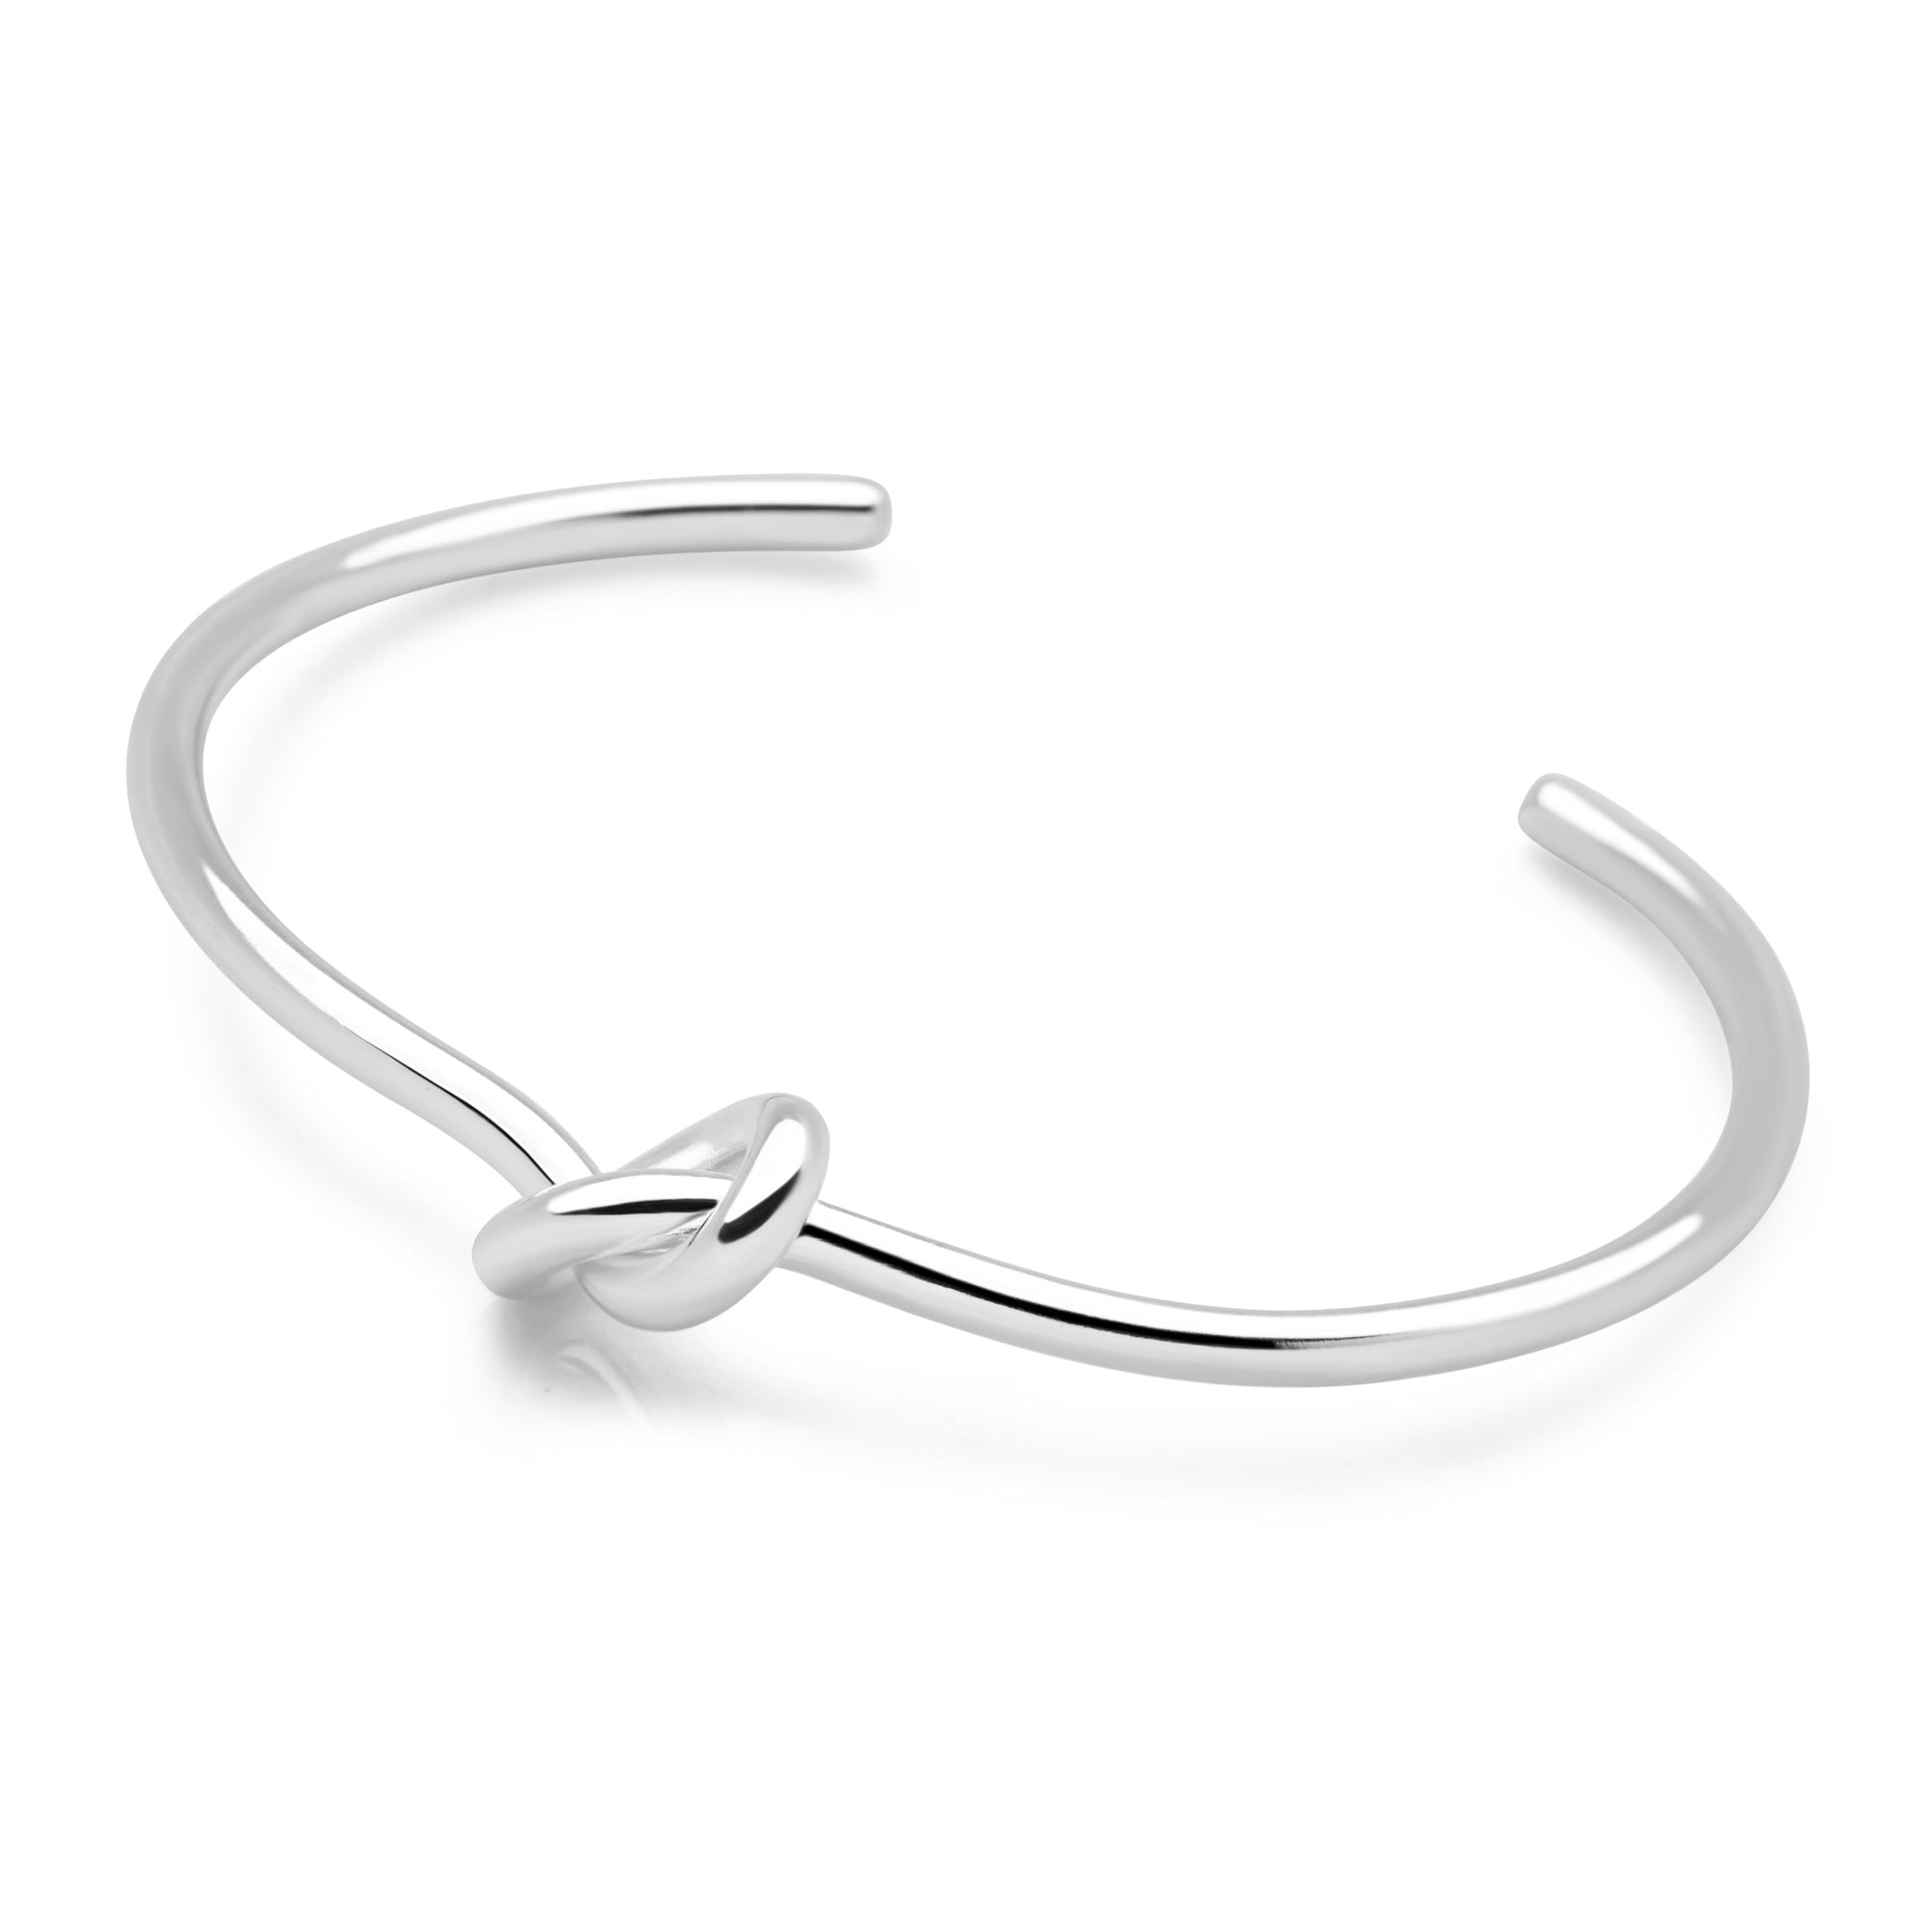 Alpine Knot Bangle | Silver Bangles | BGL859 – Silver by Mail